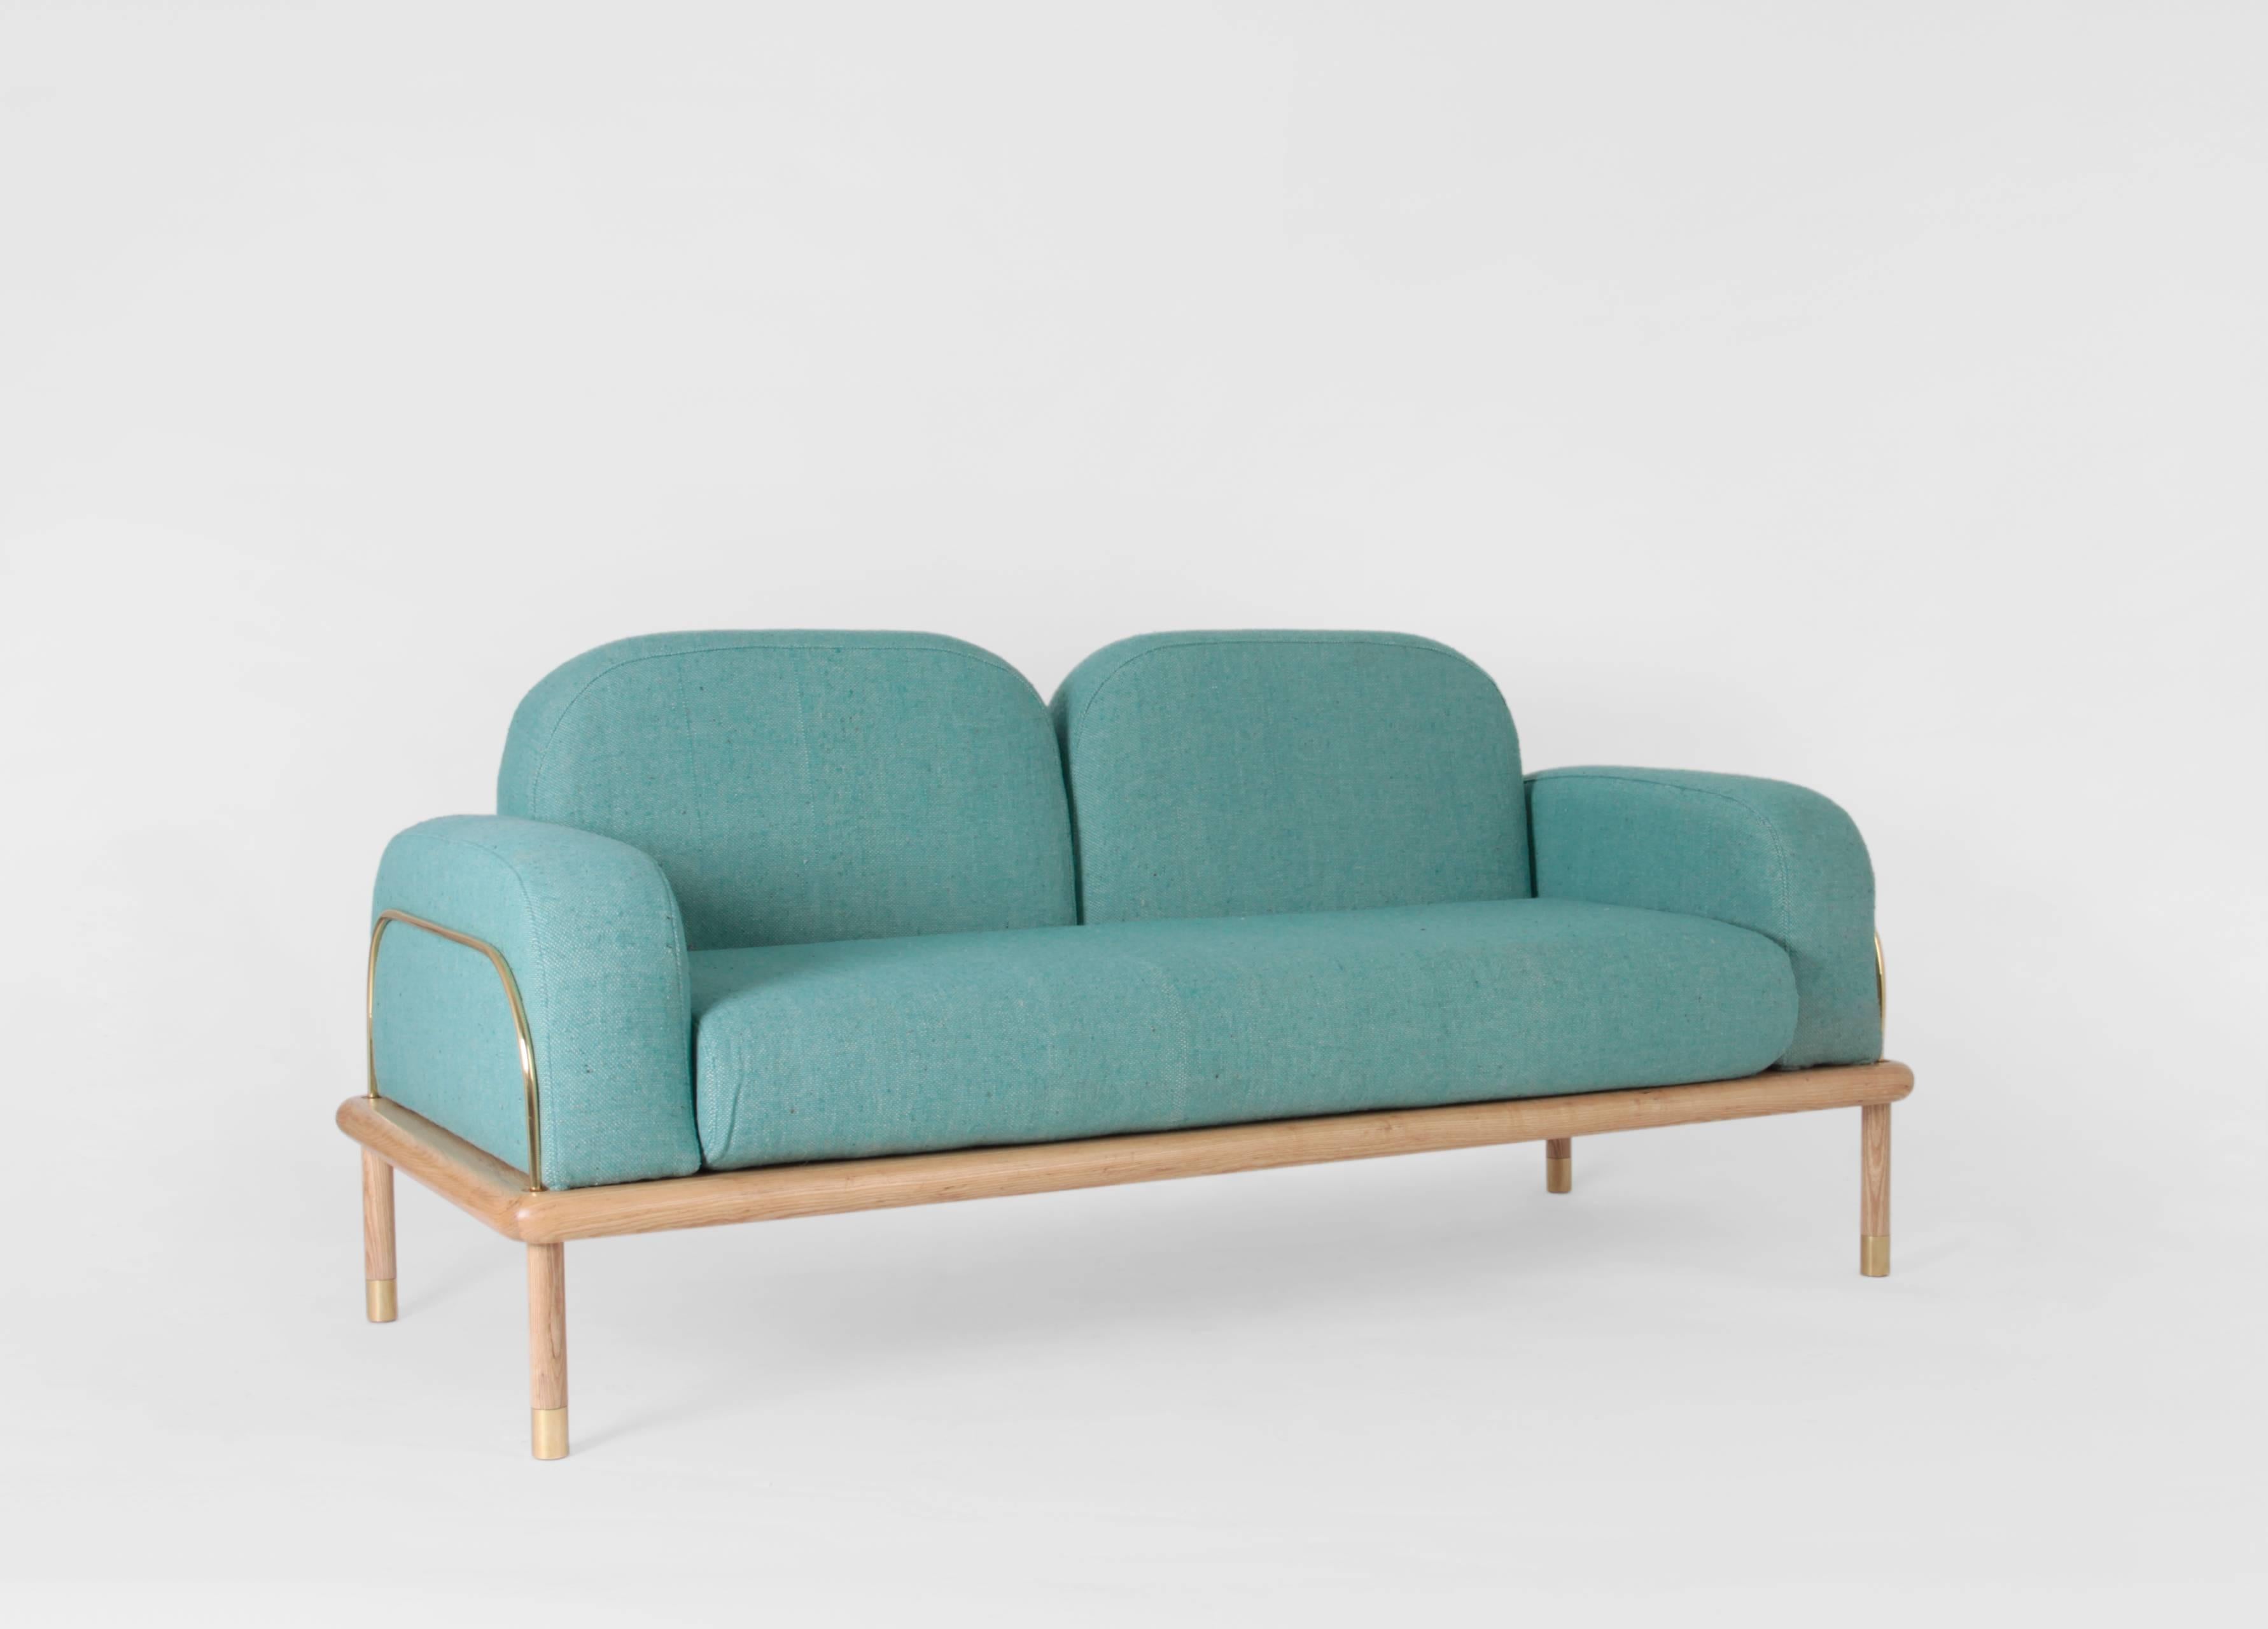 Mexican Prado/Sofa in Parota Wood and Details in Cooper or Brass For Sale